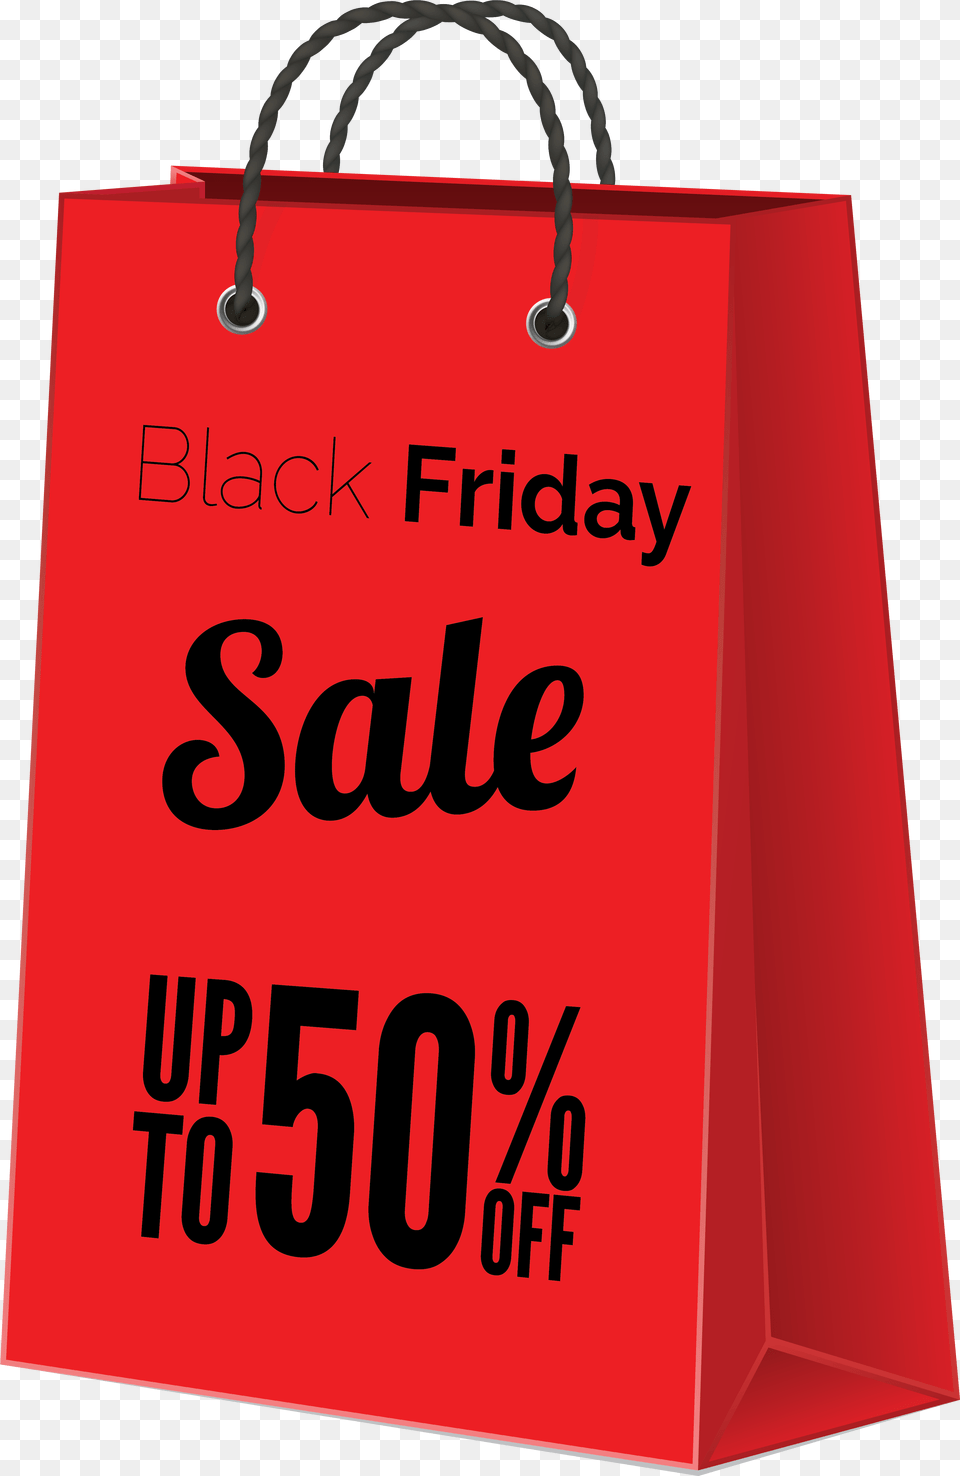 Black And White Black Friday Sale Red Sales Shopping Bags, Bag, Shopping Bag, Tote Bag Png Image